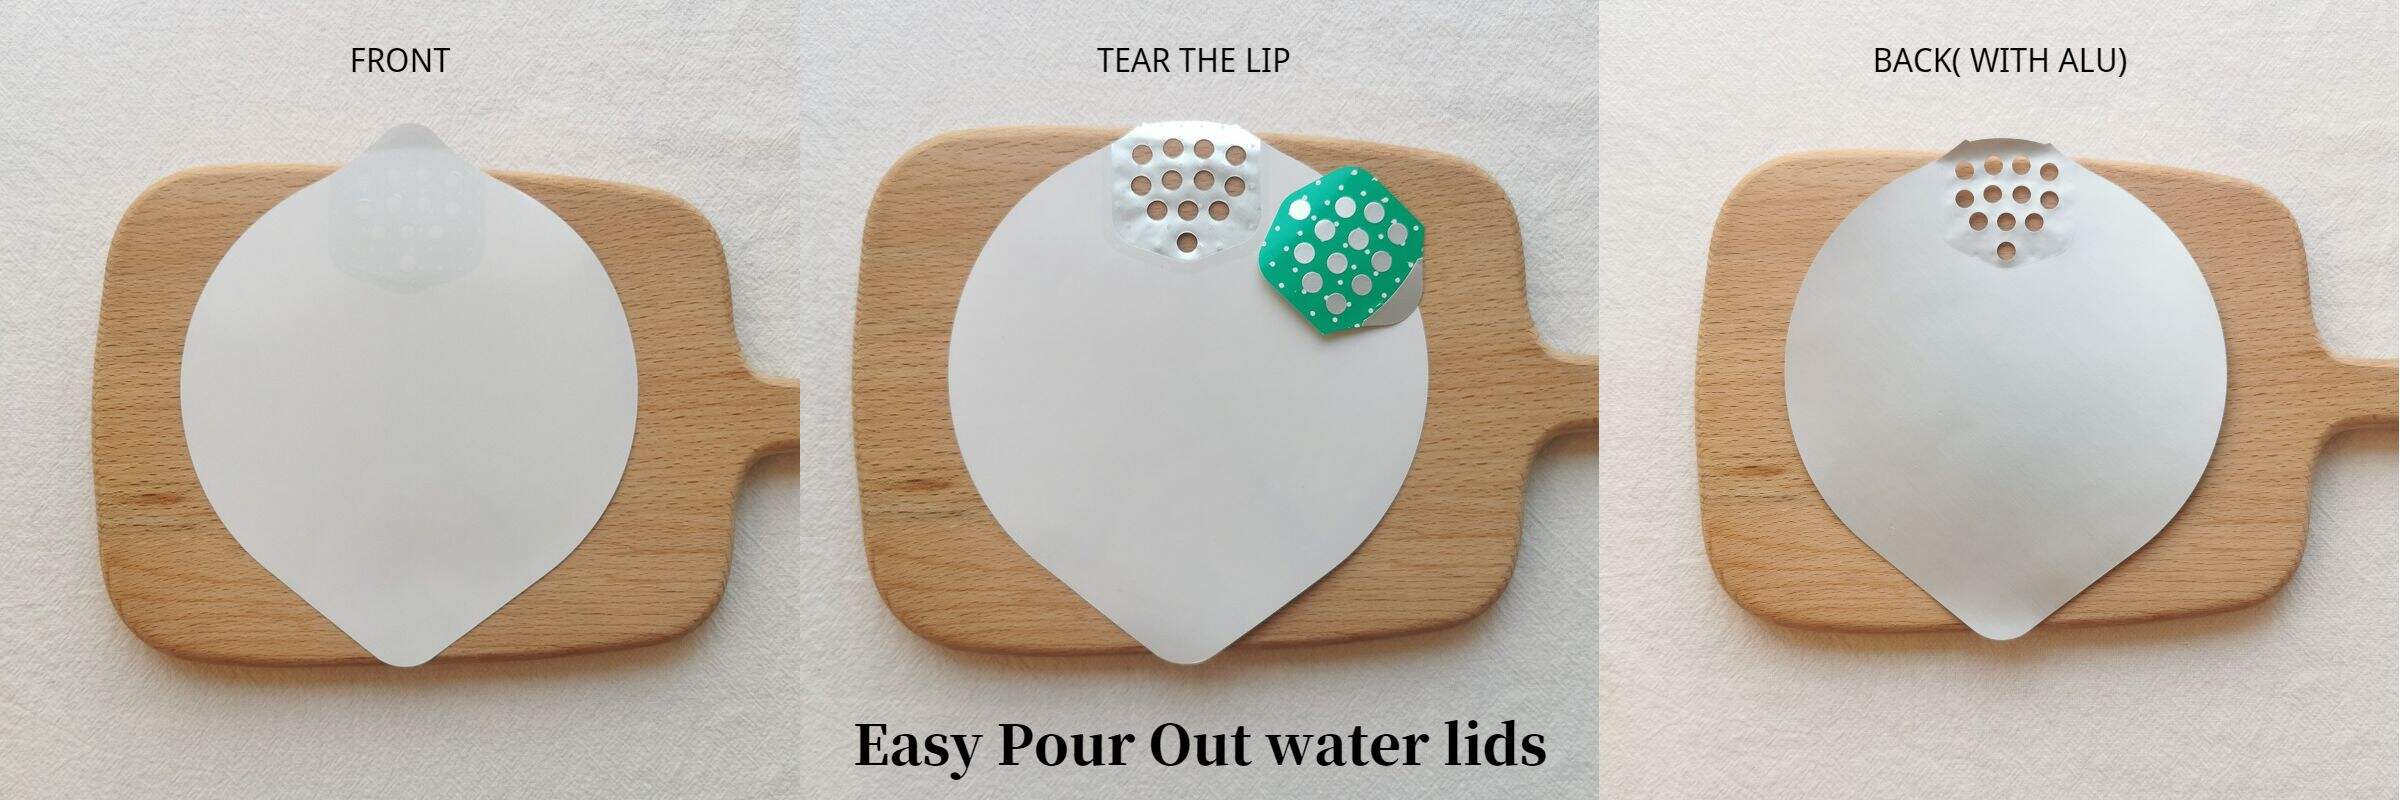 Easy Pour Out water lids